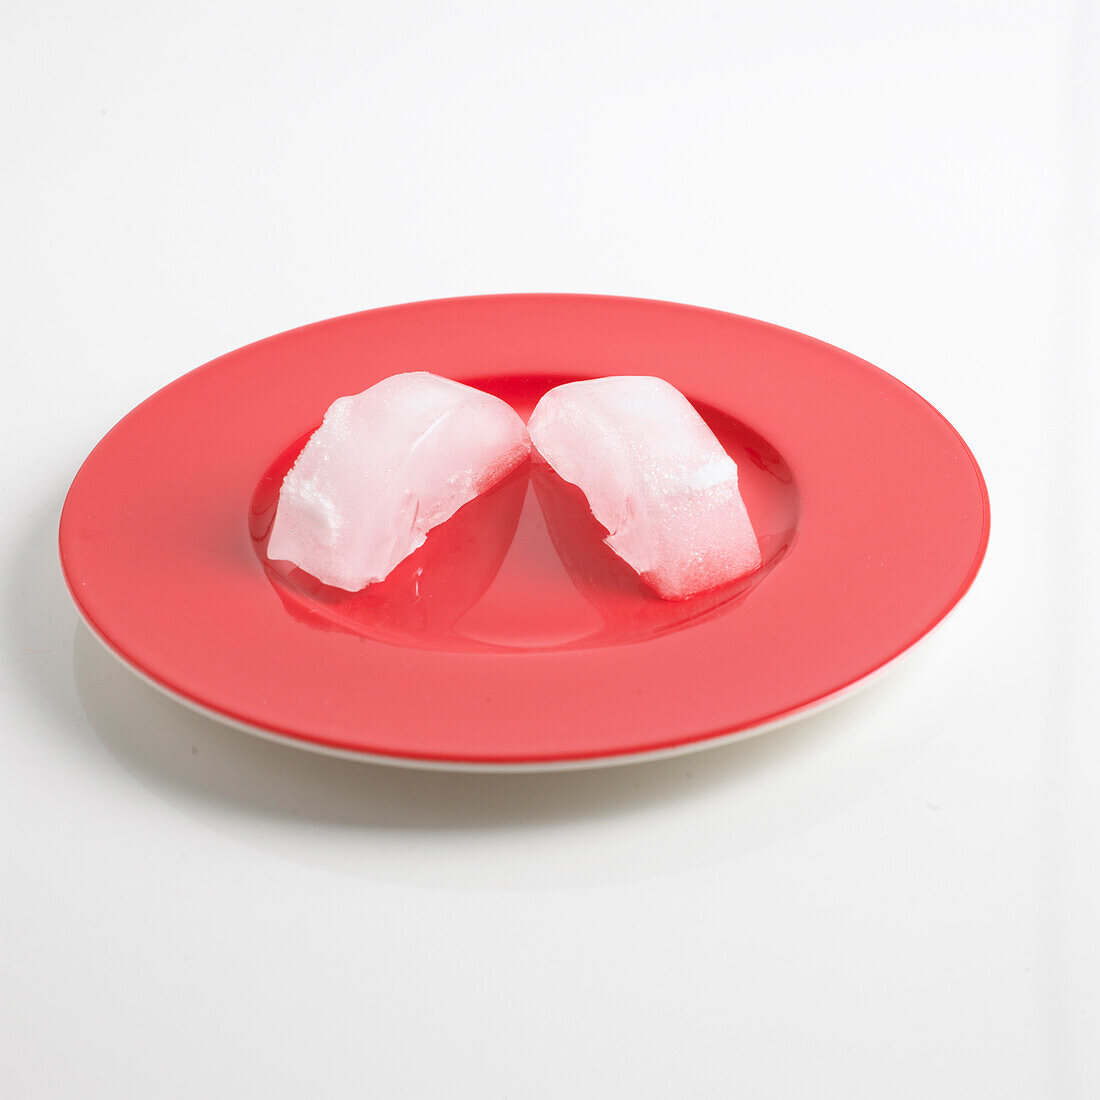 Red plate holding two ice cubes